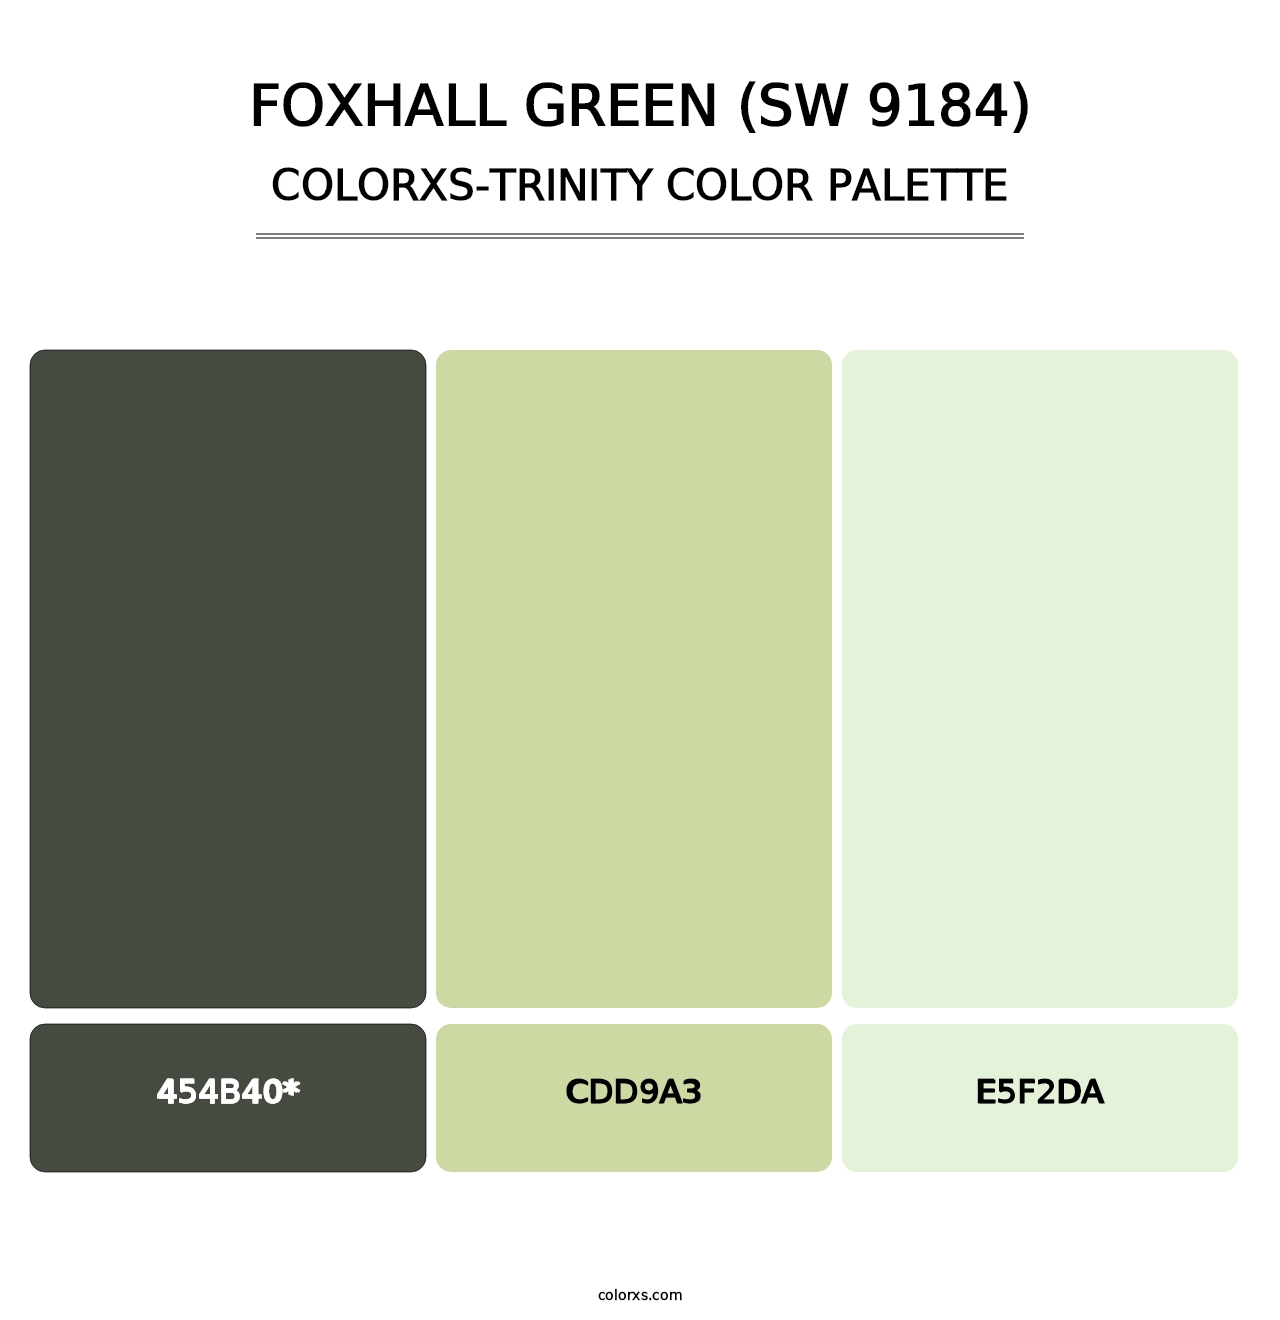 Foxhall Green (SW 9184) - Colorxs Trinity Palette